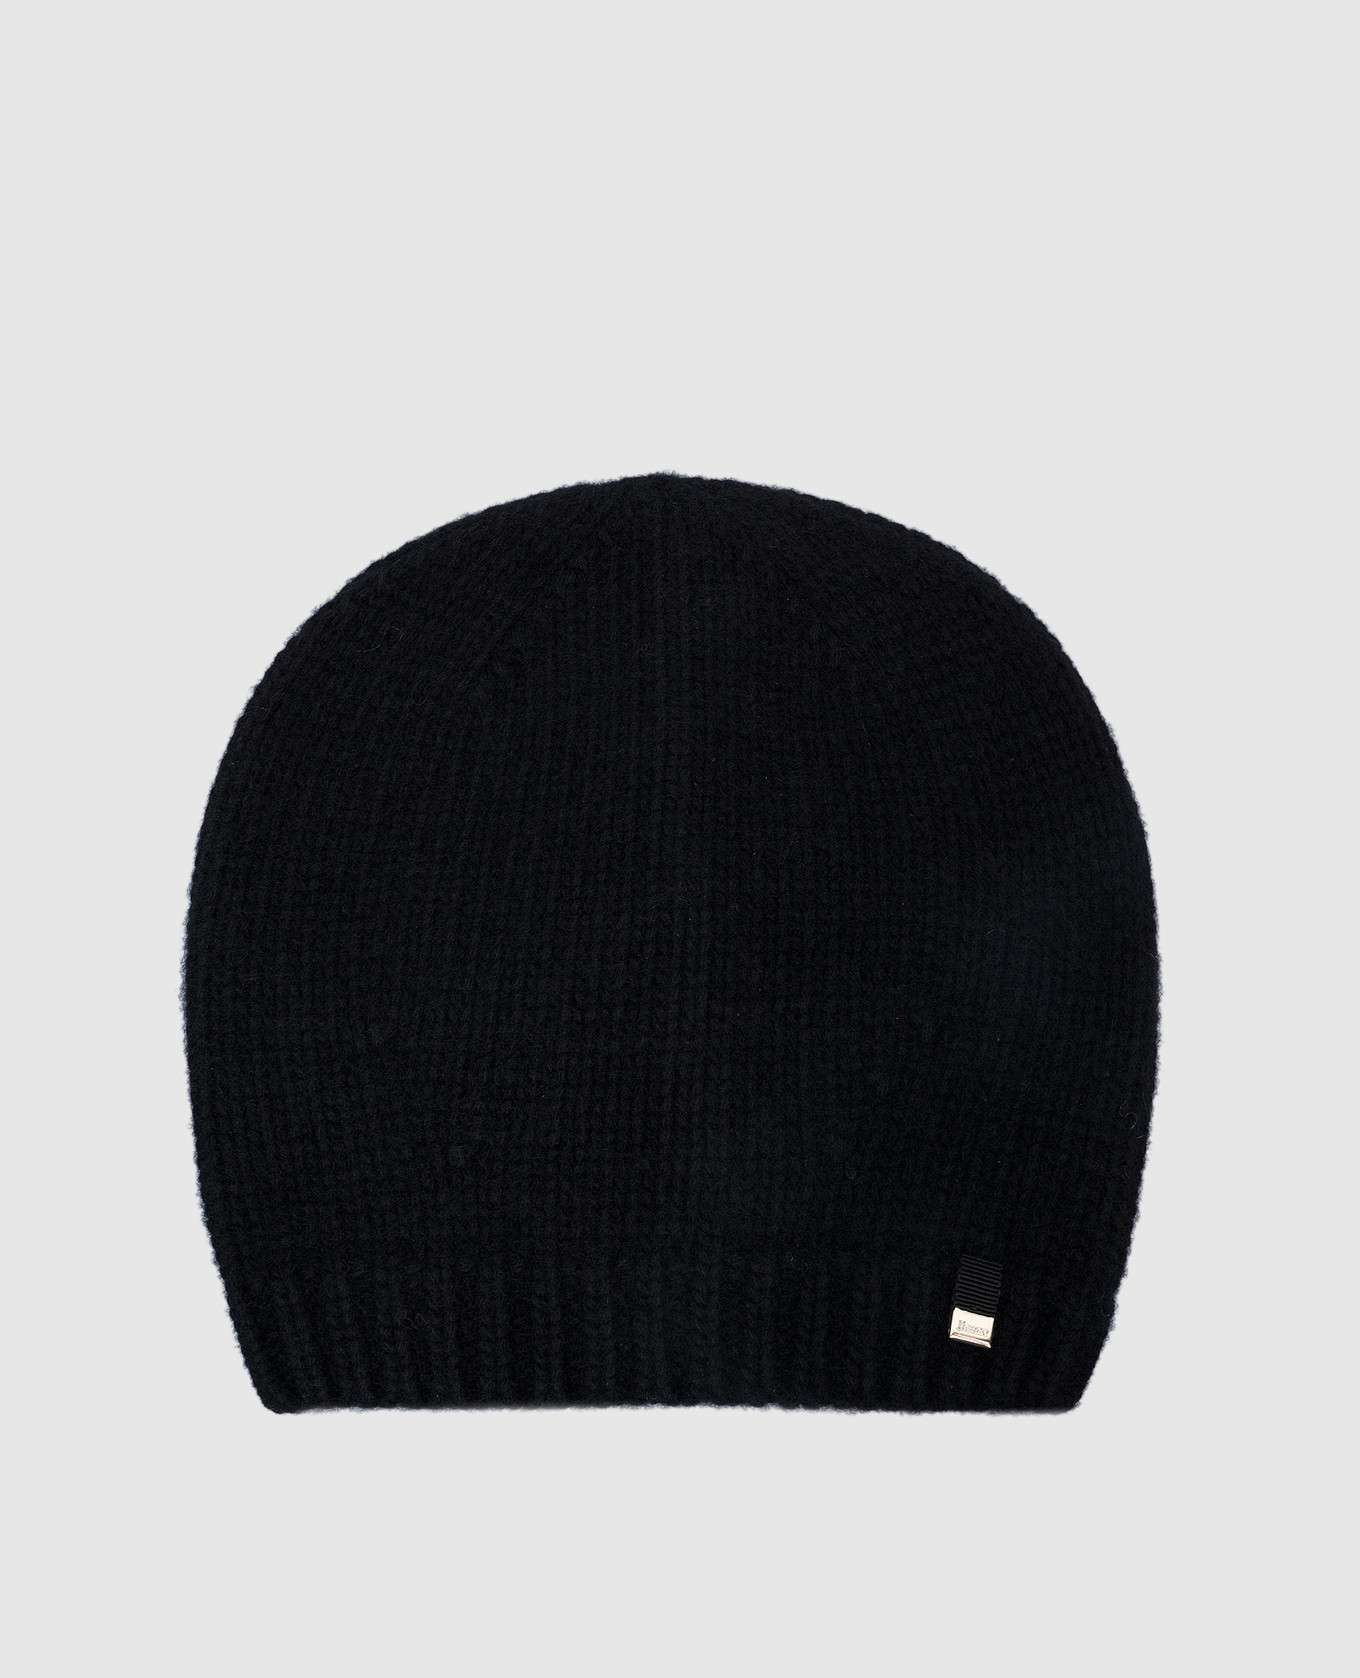 Black wool and cashmere beanie with logo